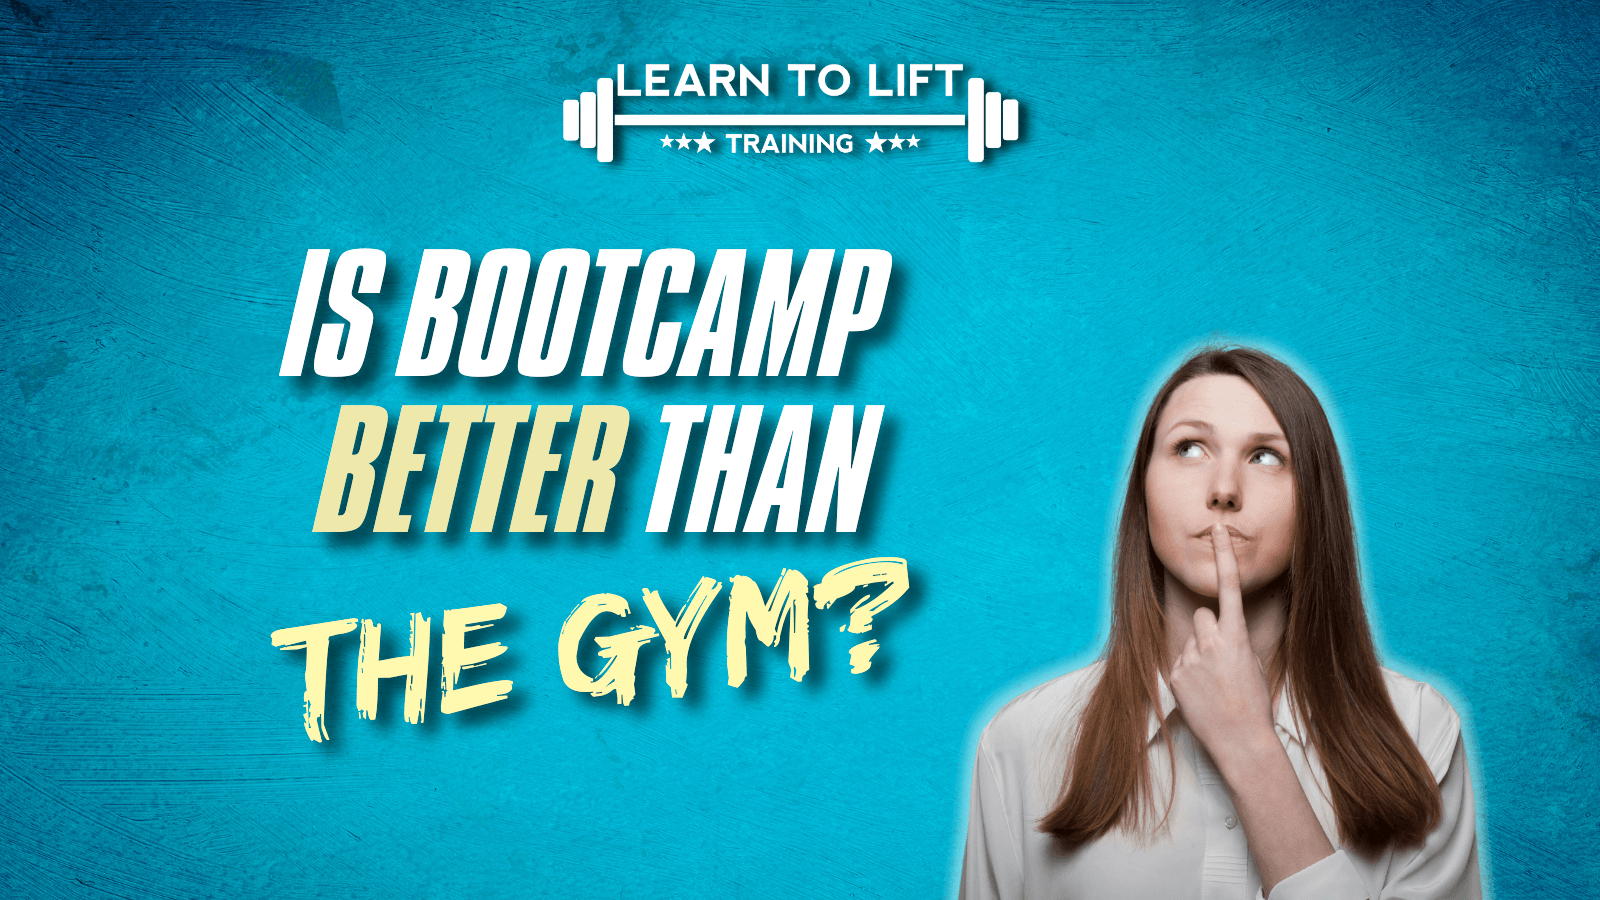 Bootcamp Glasgow - Is Bootcamp Better Than The Gym?